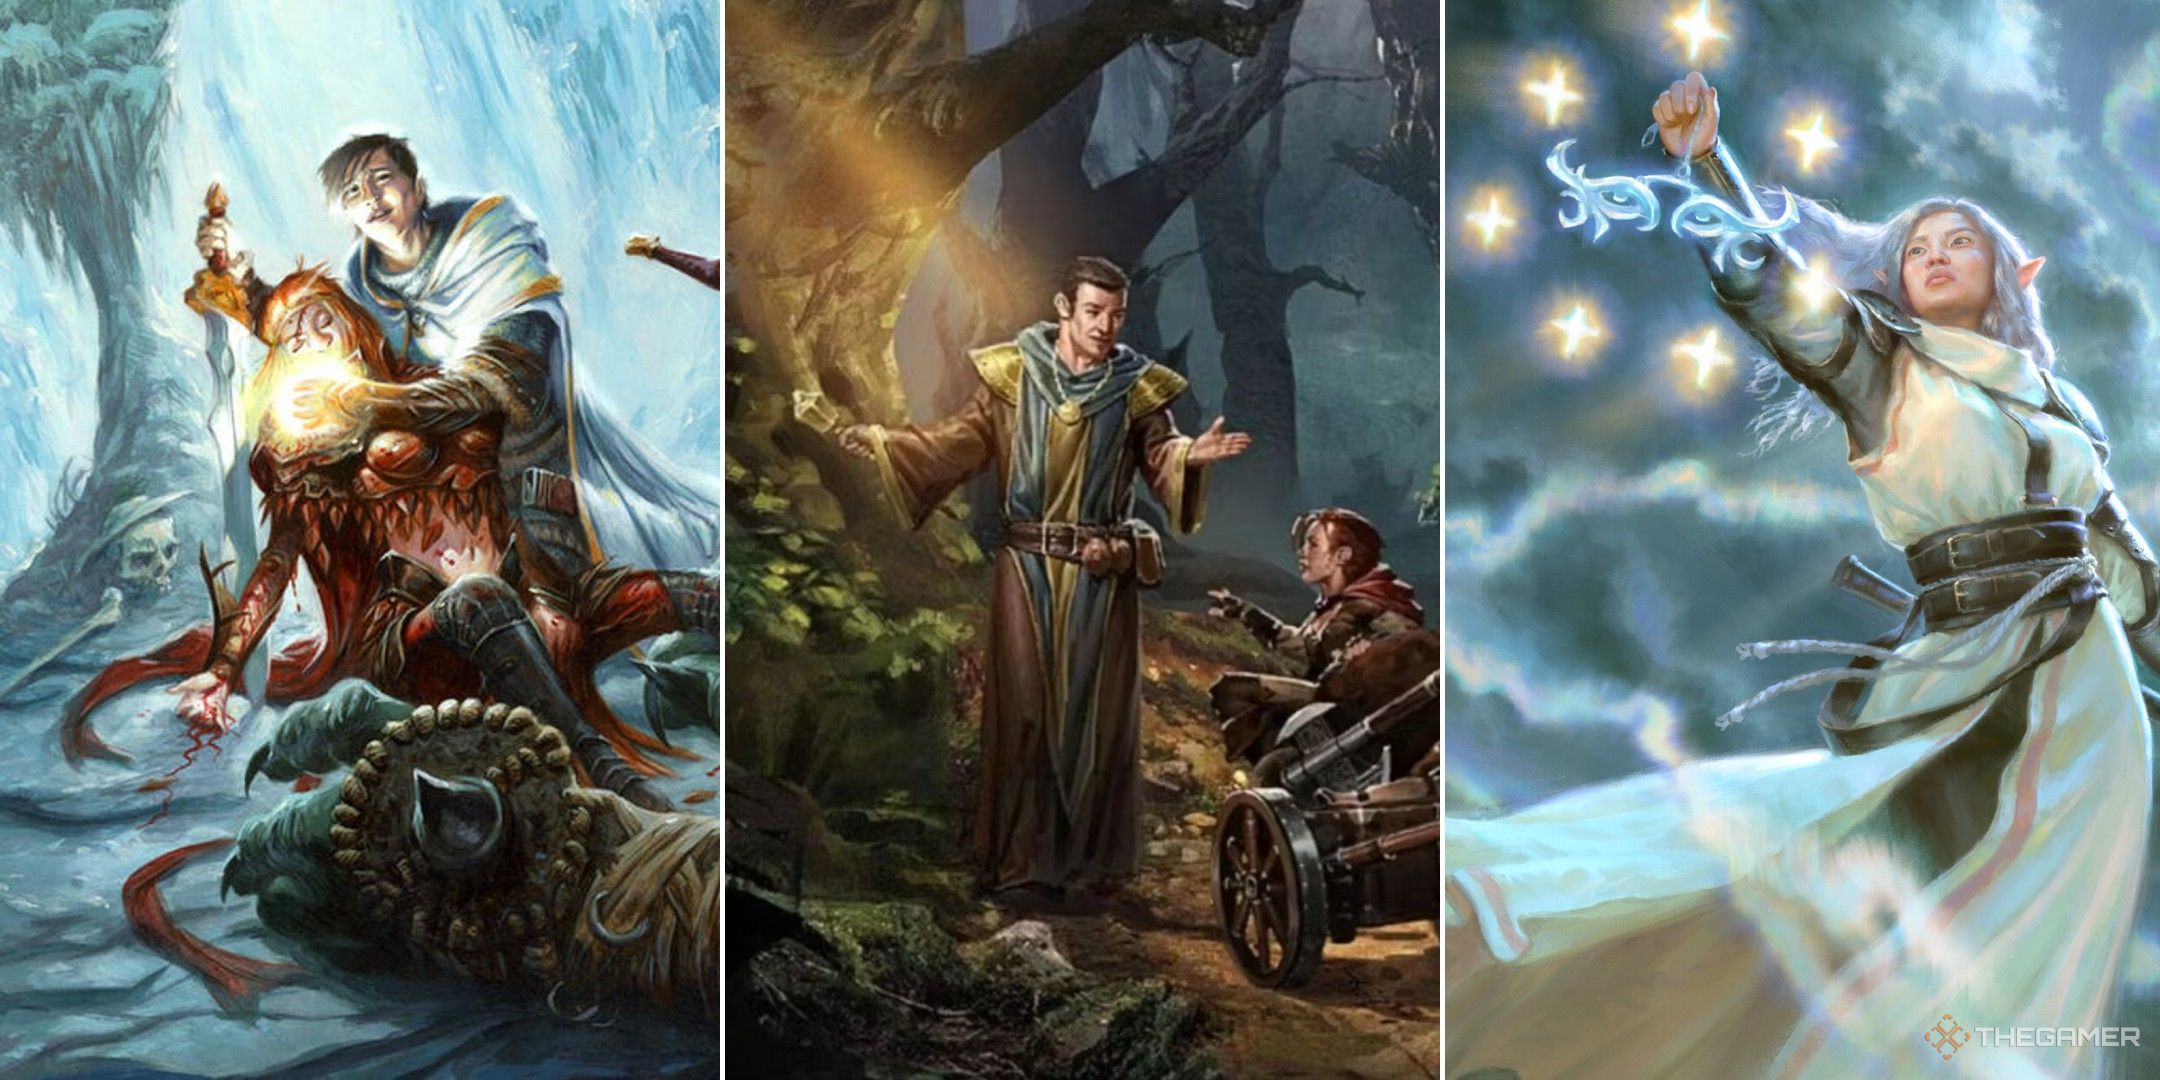 dungeons & dragons collage showing three clerics, one healing, one traveling, and one channeling their god